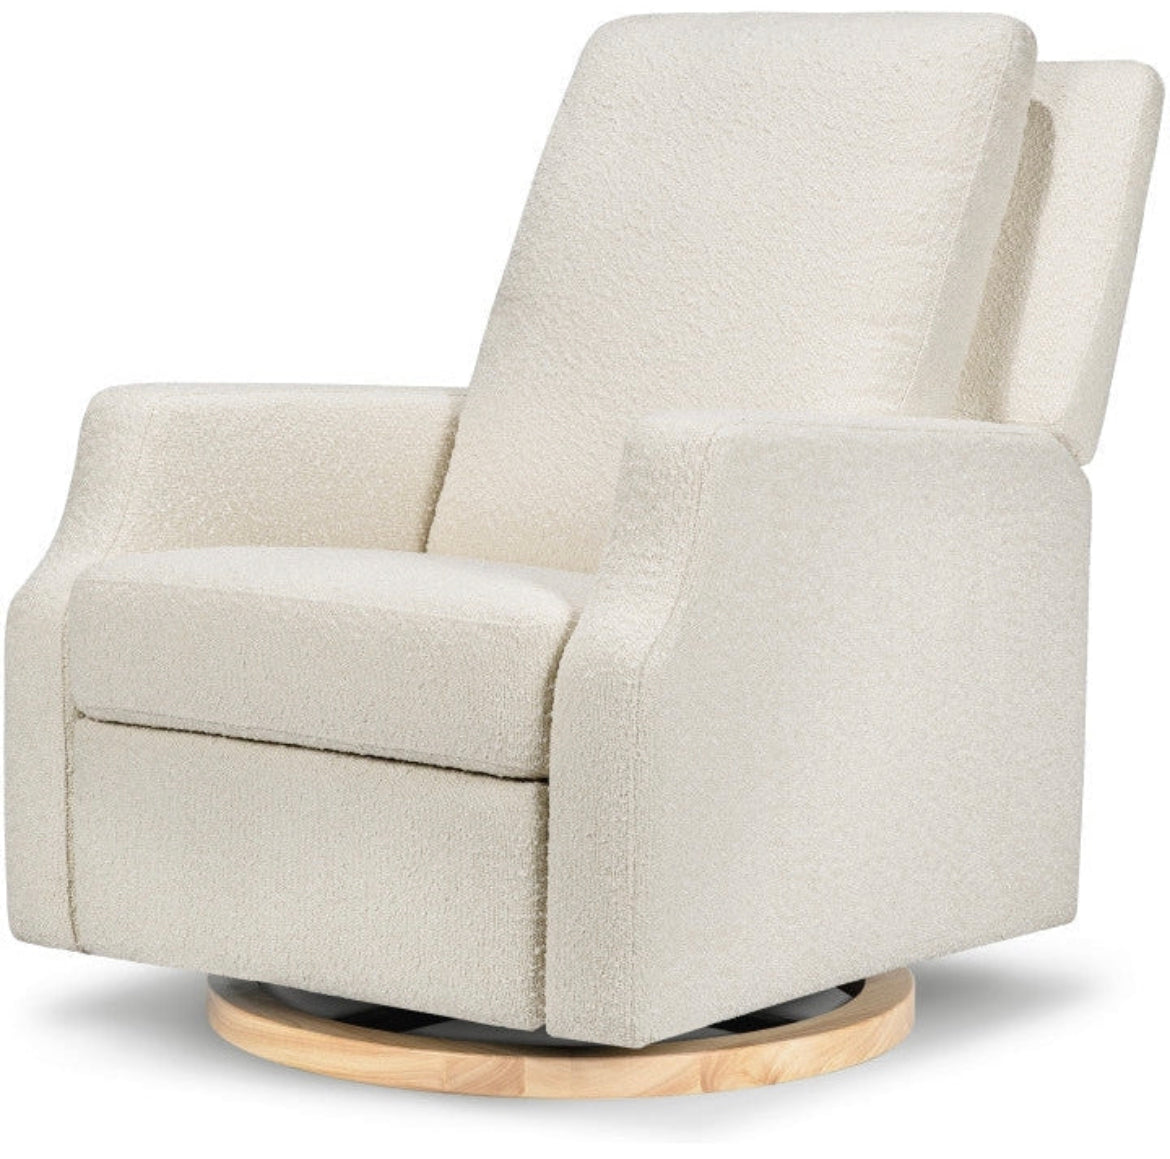 **IN STOCK**Namesake Crewe Nursery Glider Recliner- Ivory Boucle on a wood base